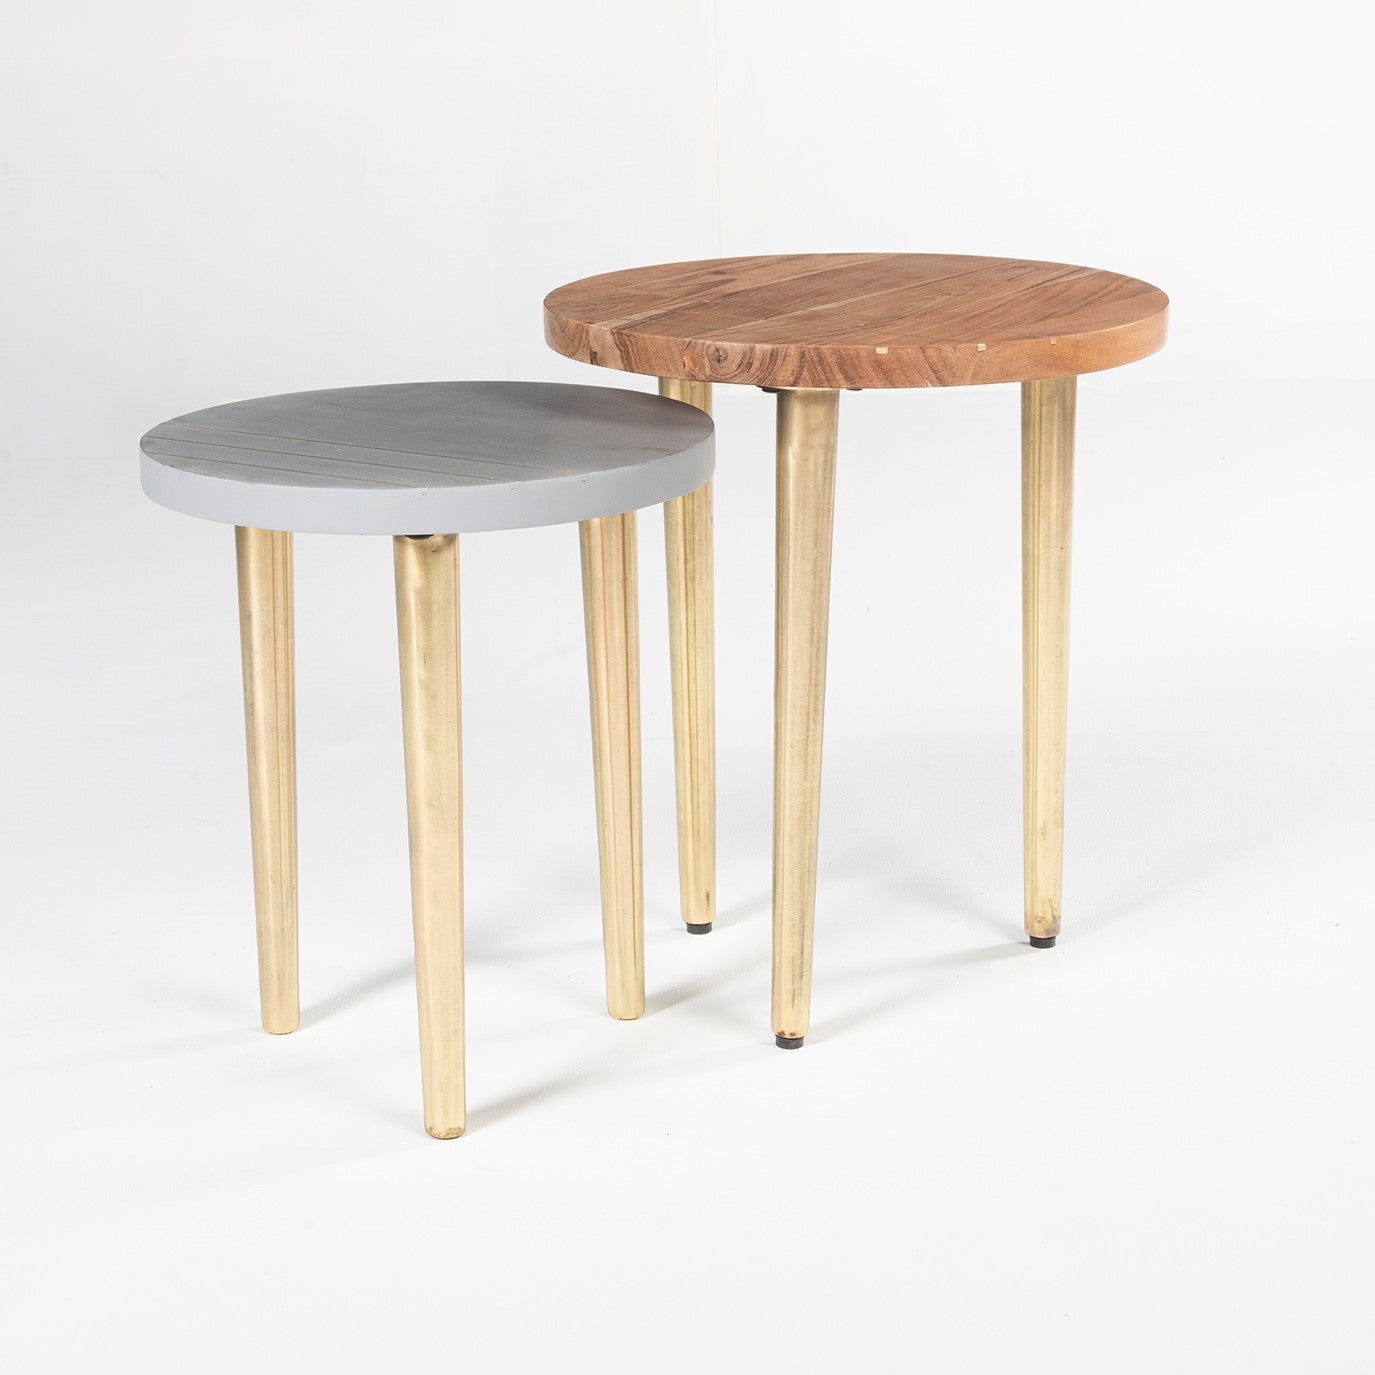 Toshi Side Table Set Of 2